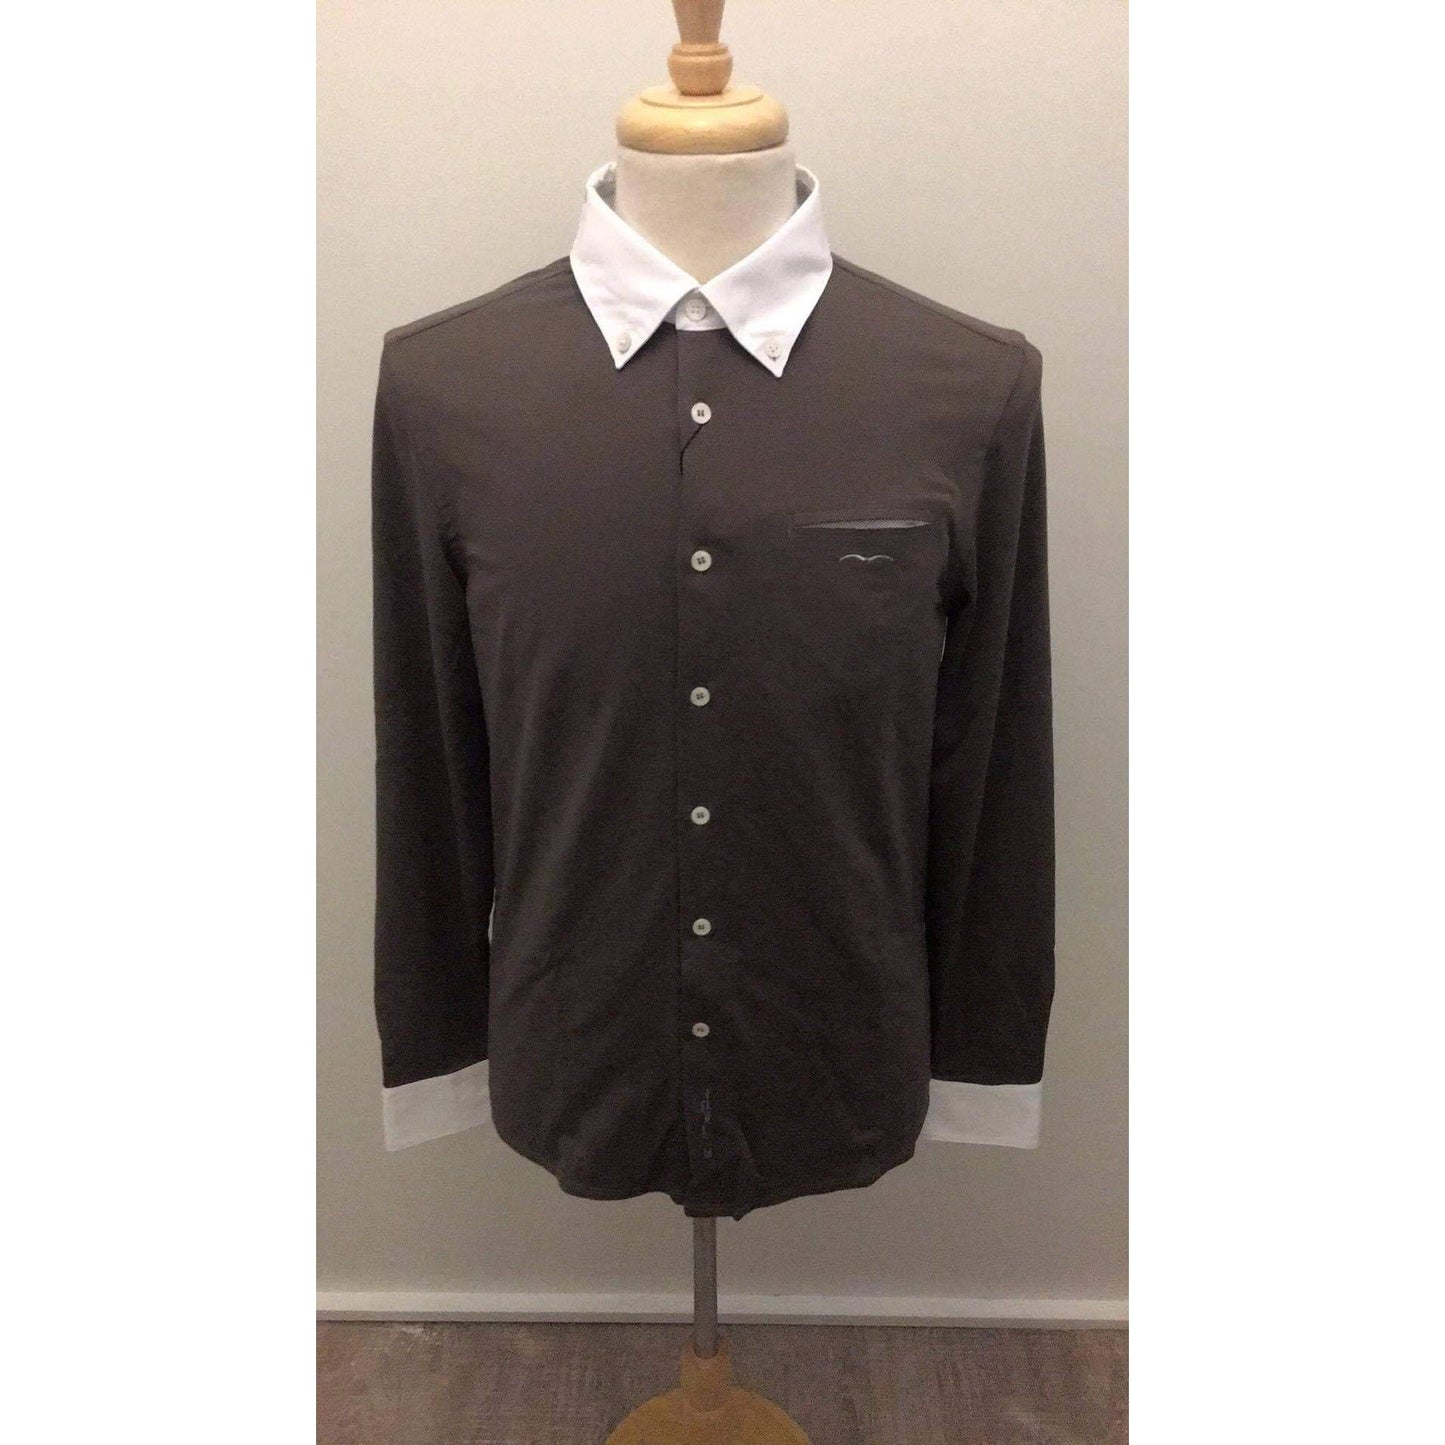 Animo brand men's dress shirt with white collar on mannequin.